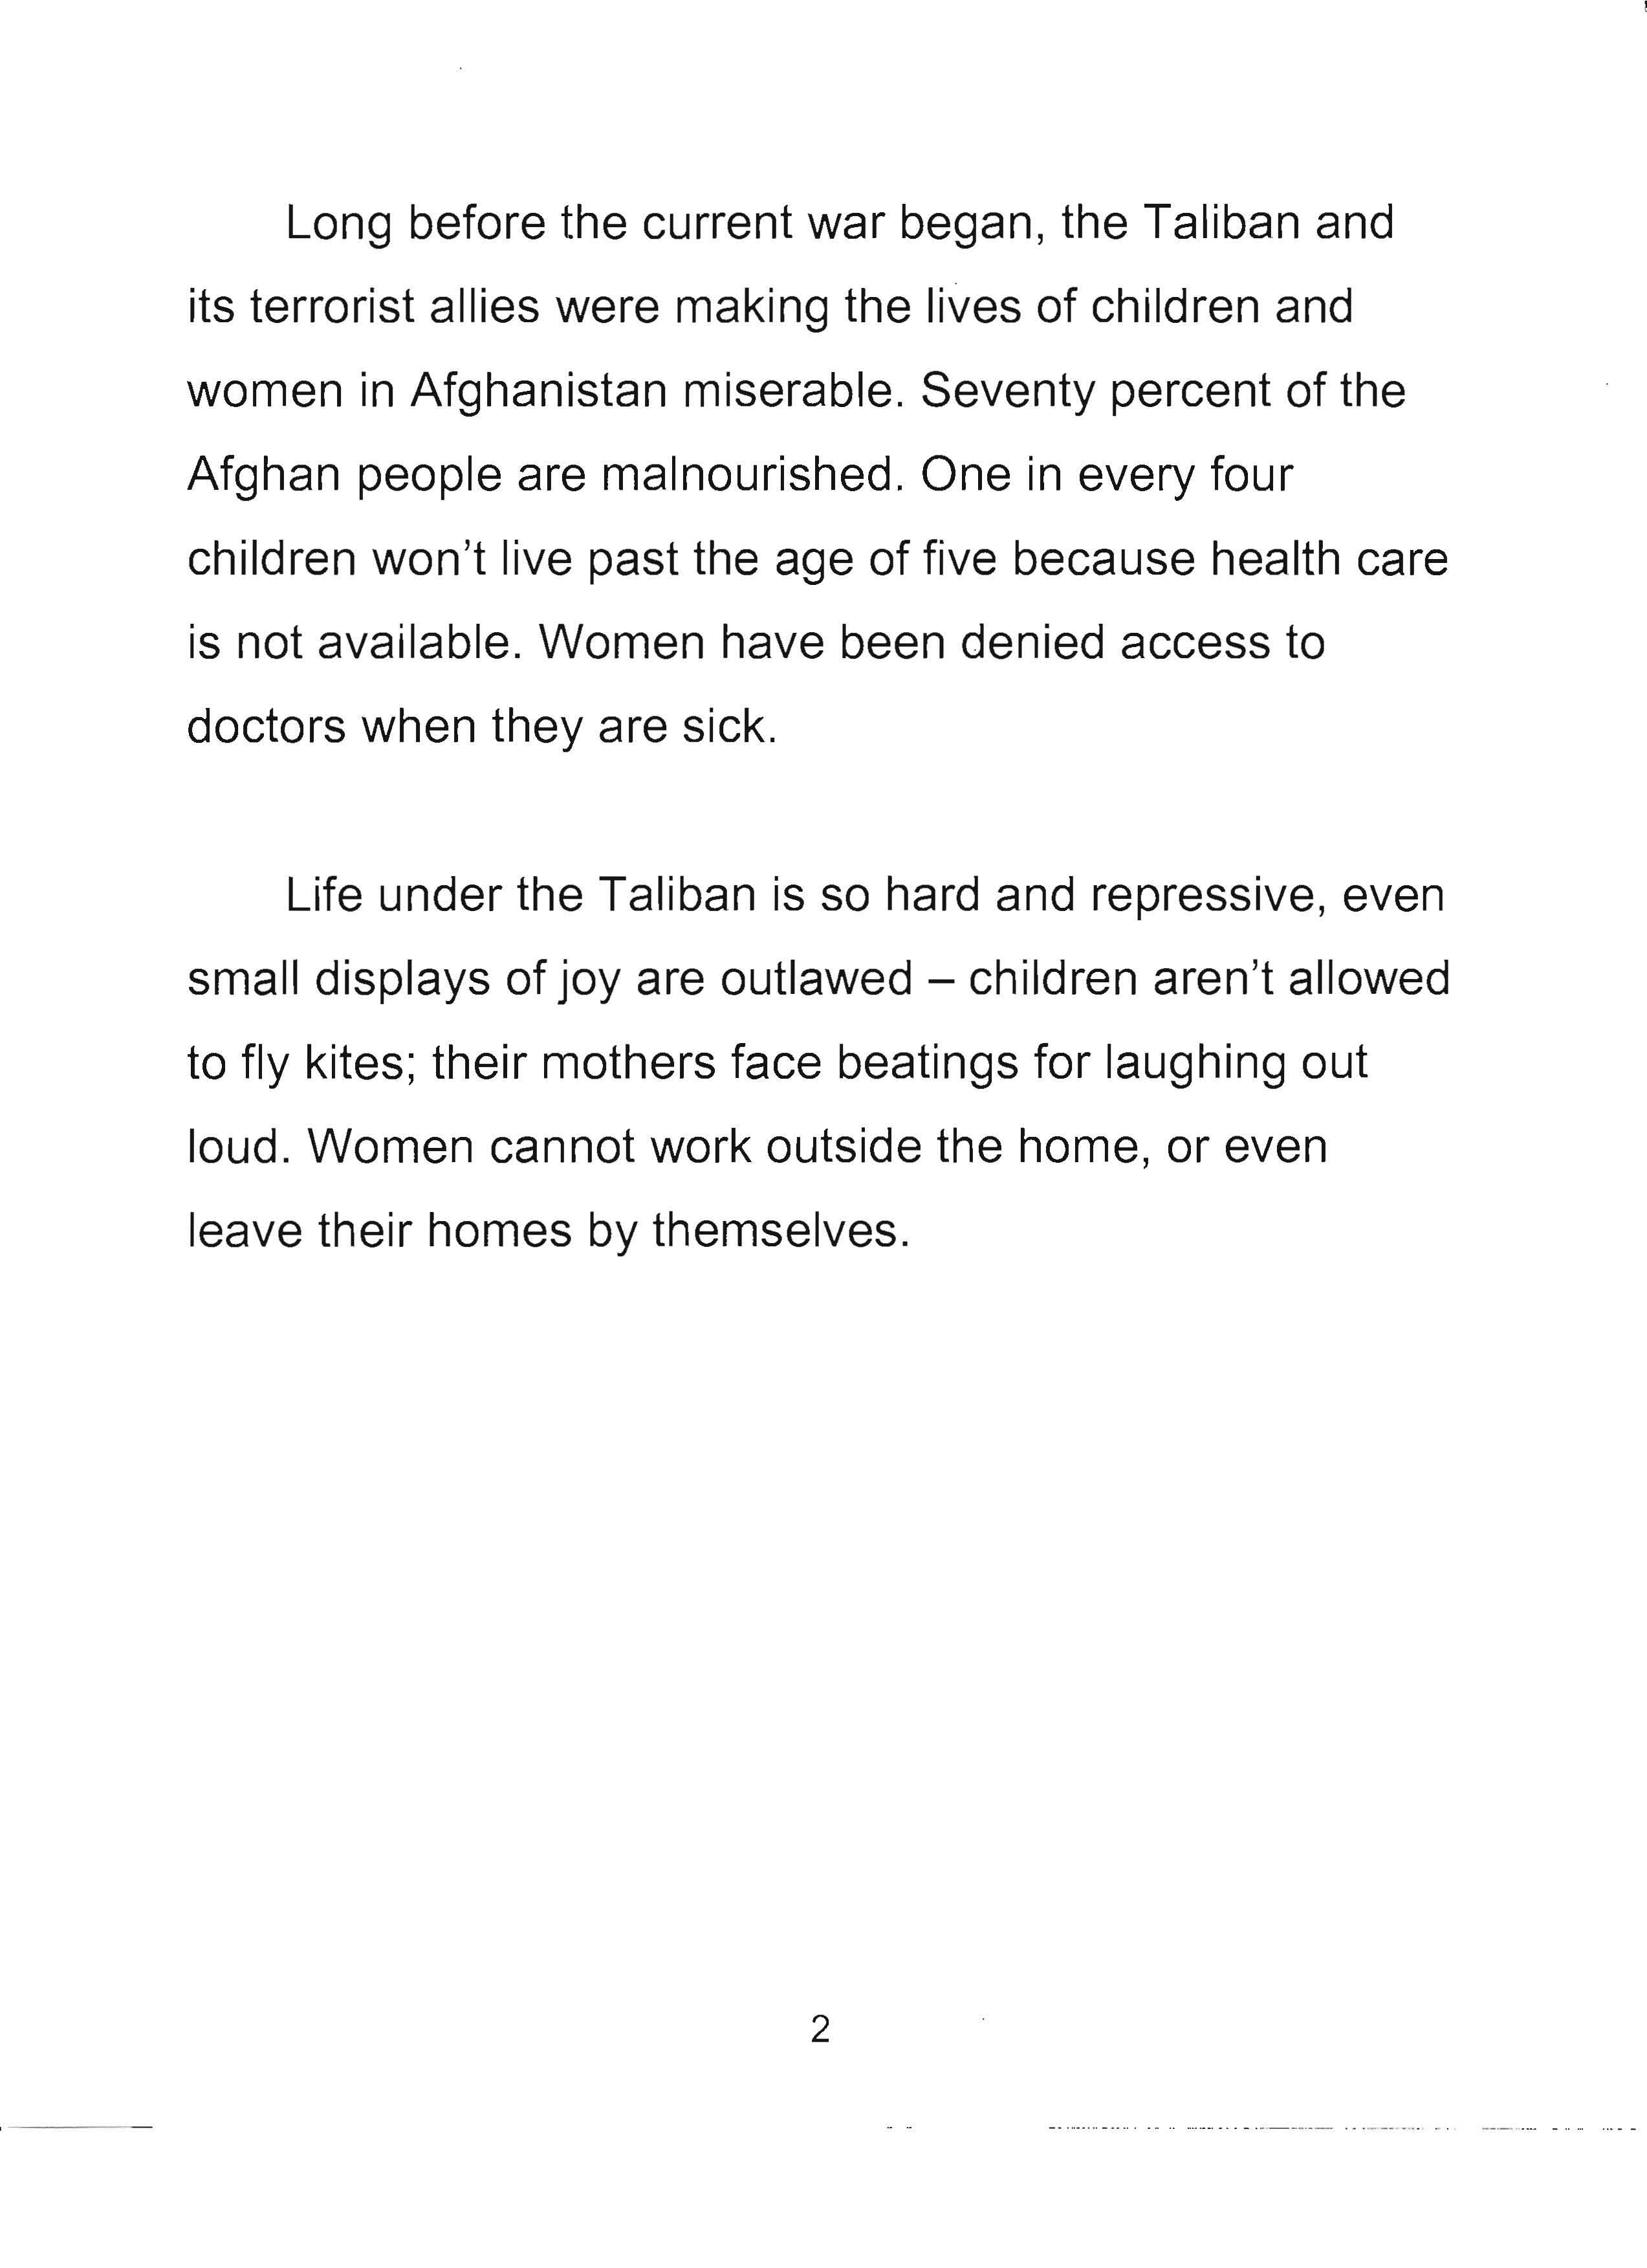 Statement used by First Lady Laura Bush to deliver a radio address on November 17, 2001 about the treatment of women and children by the Taliban in Afghanistan. (Page 2 of 5)